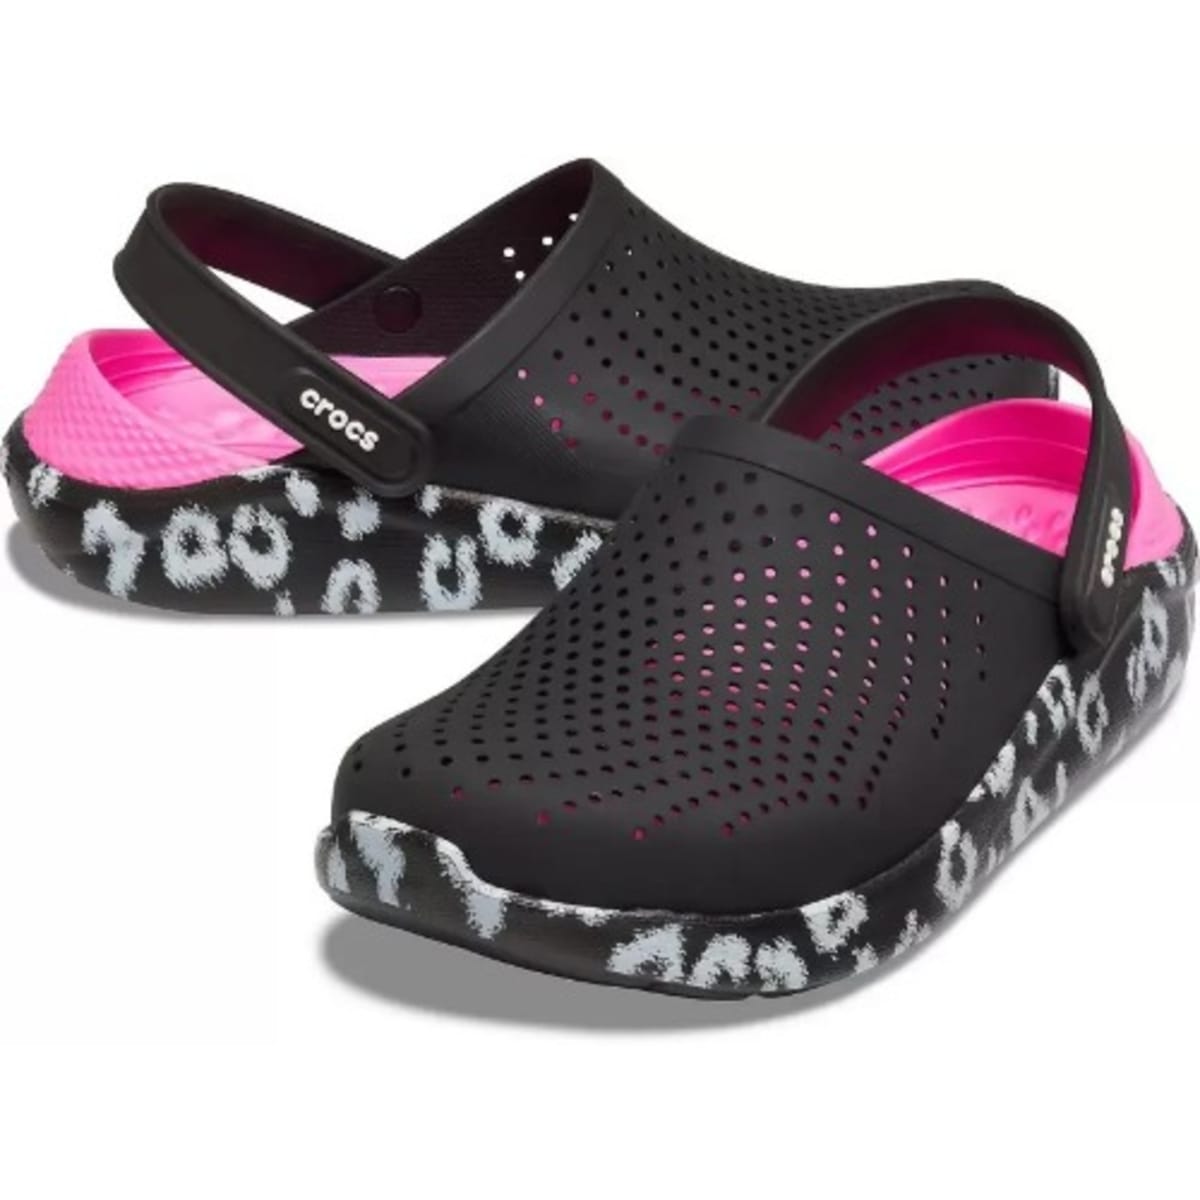 Crocs sandals - Everything Shoes